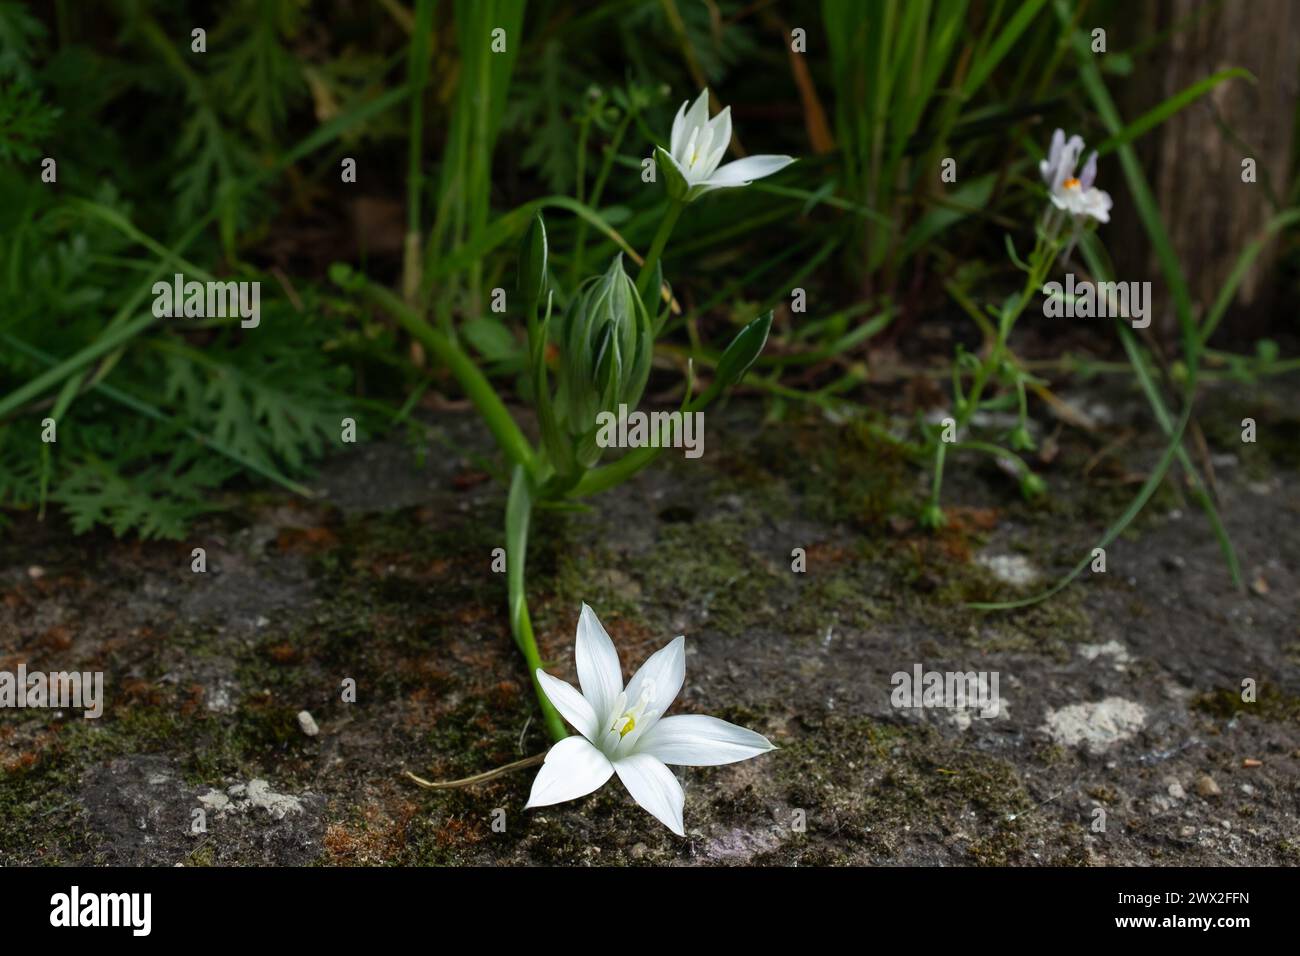 A star of Bethlehem (Ornithogalum divergens) and a three-leaved toadflax (Linaria triphylla) Stock Photo